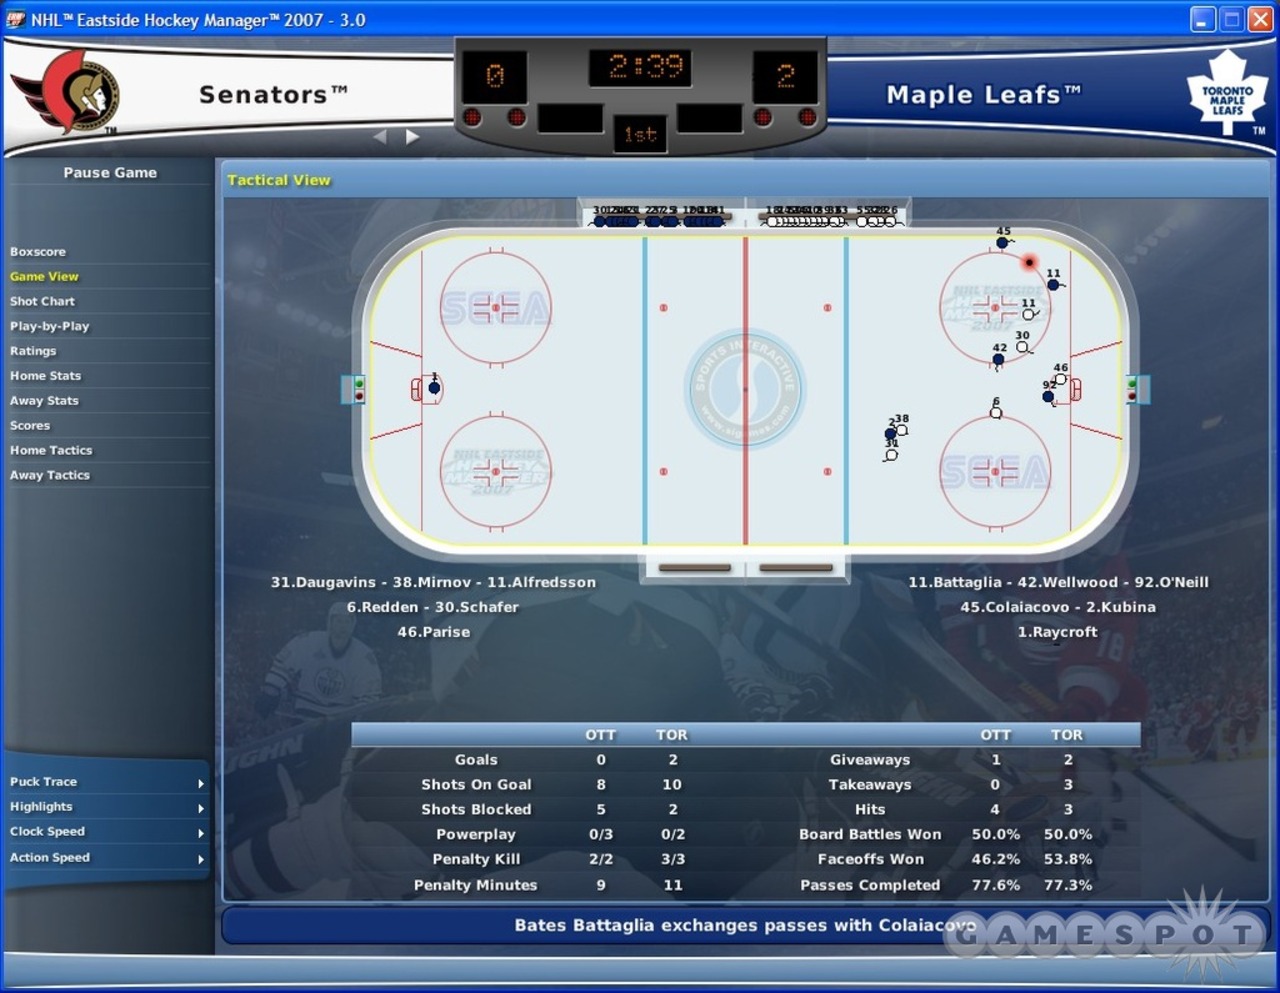 NHL Eastside Hockey Manager 2007 Review